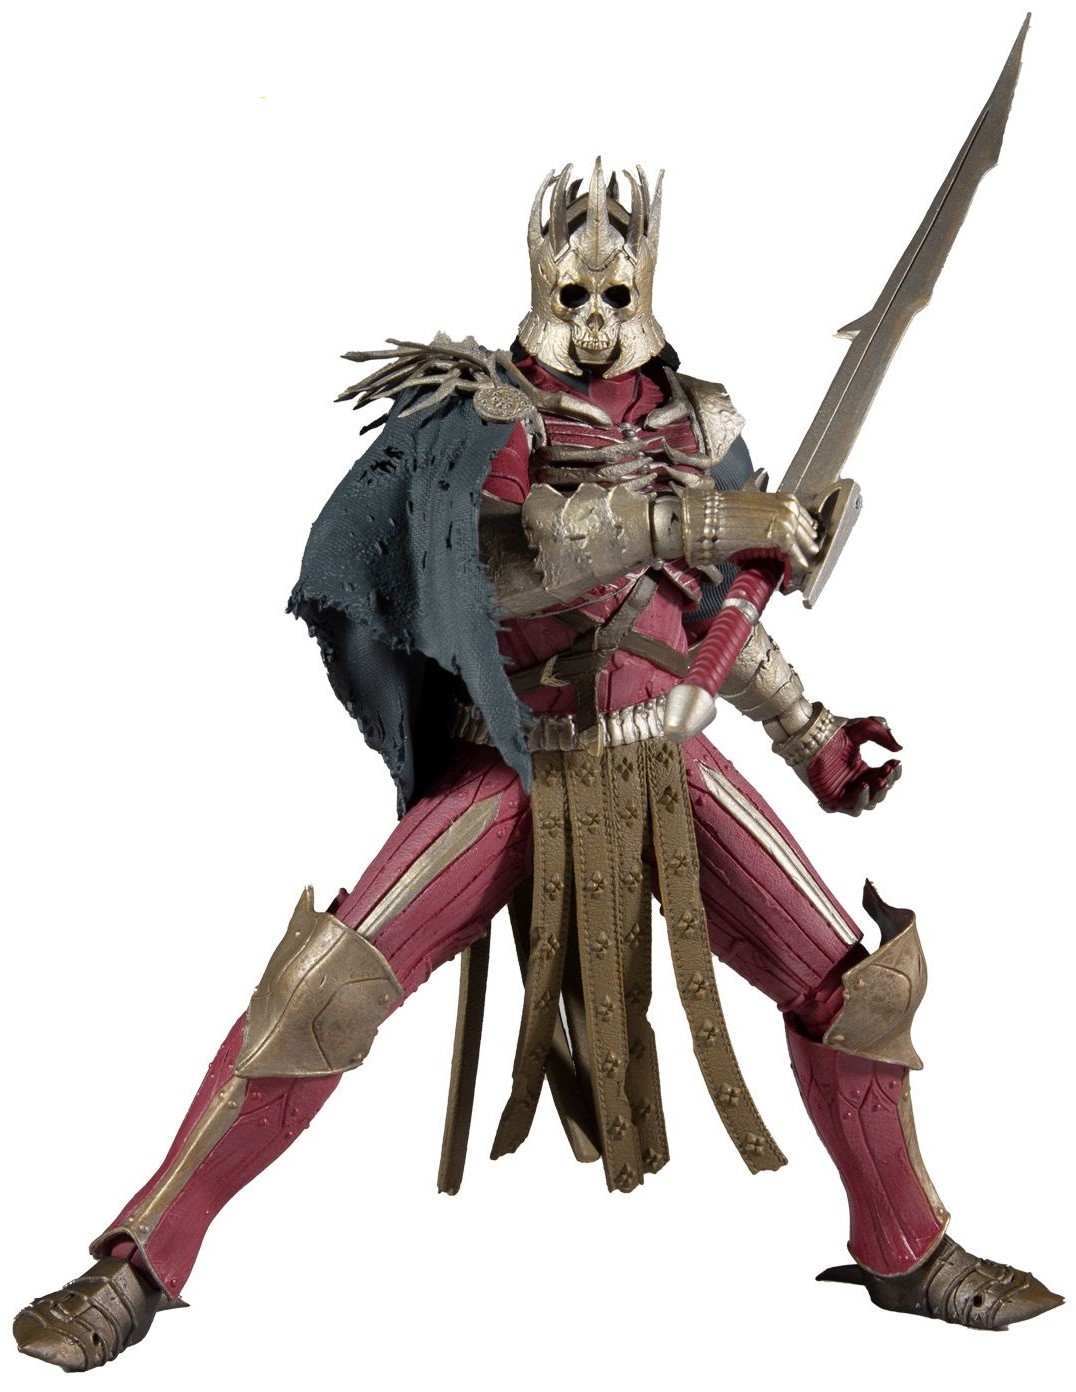 7" Witcher Gaming Action Figure: Eredin Breacc Glas $12.03 + Free Shipping w/ Prime or on $25+